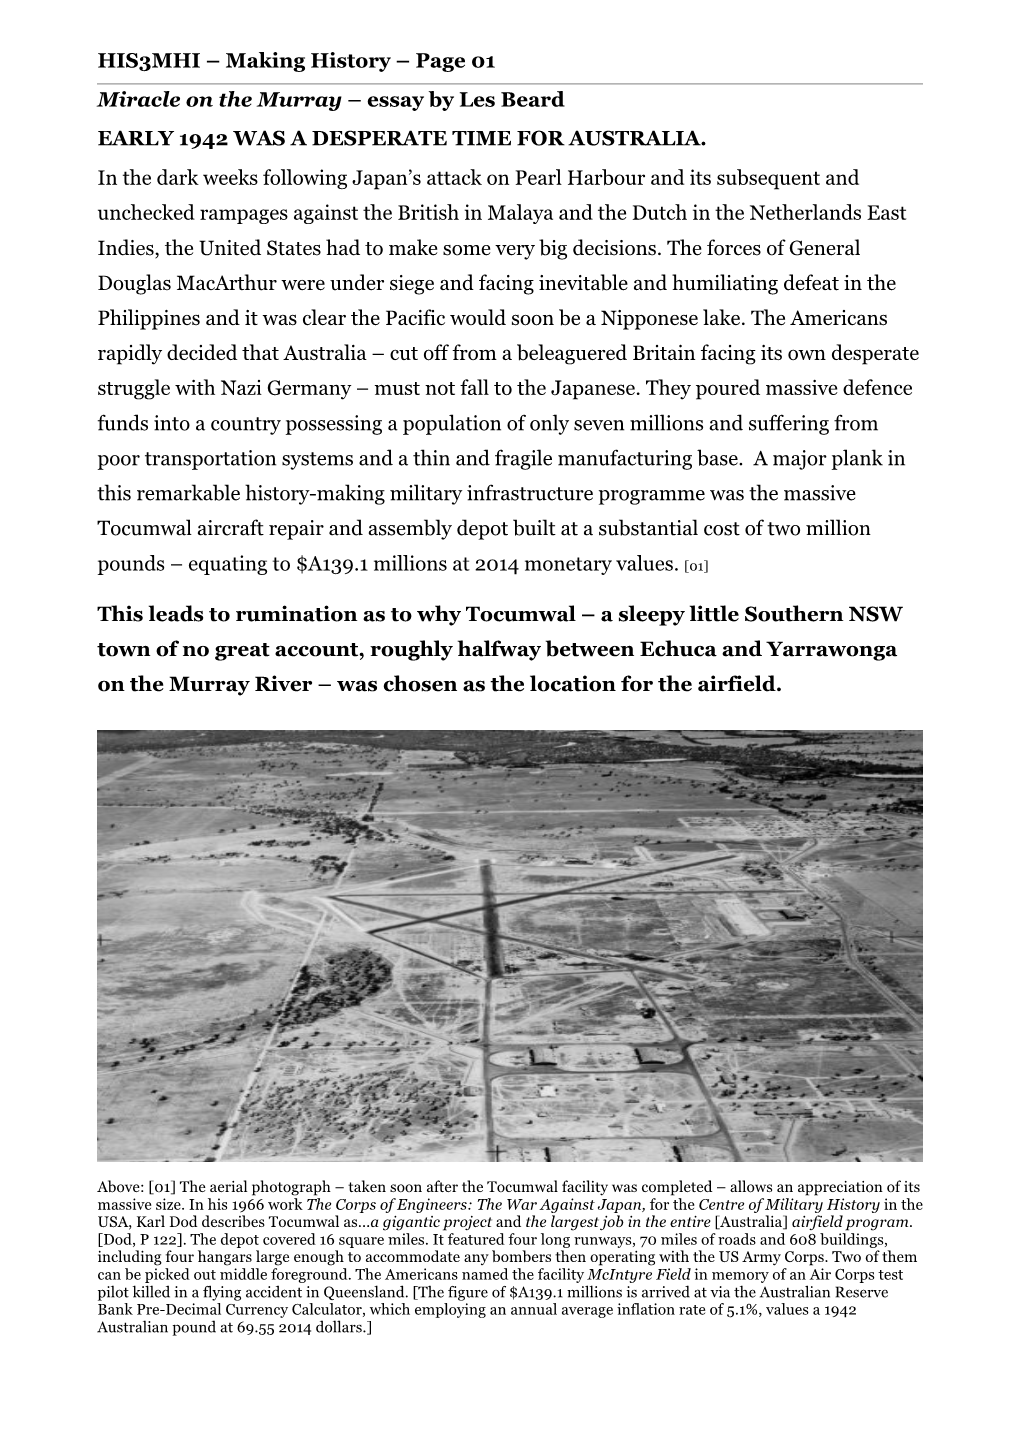 HIS3MHI – Making History – Page 01 Miracle on the Murray